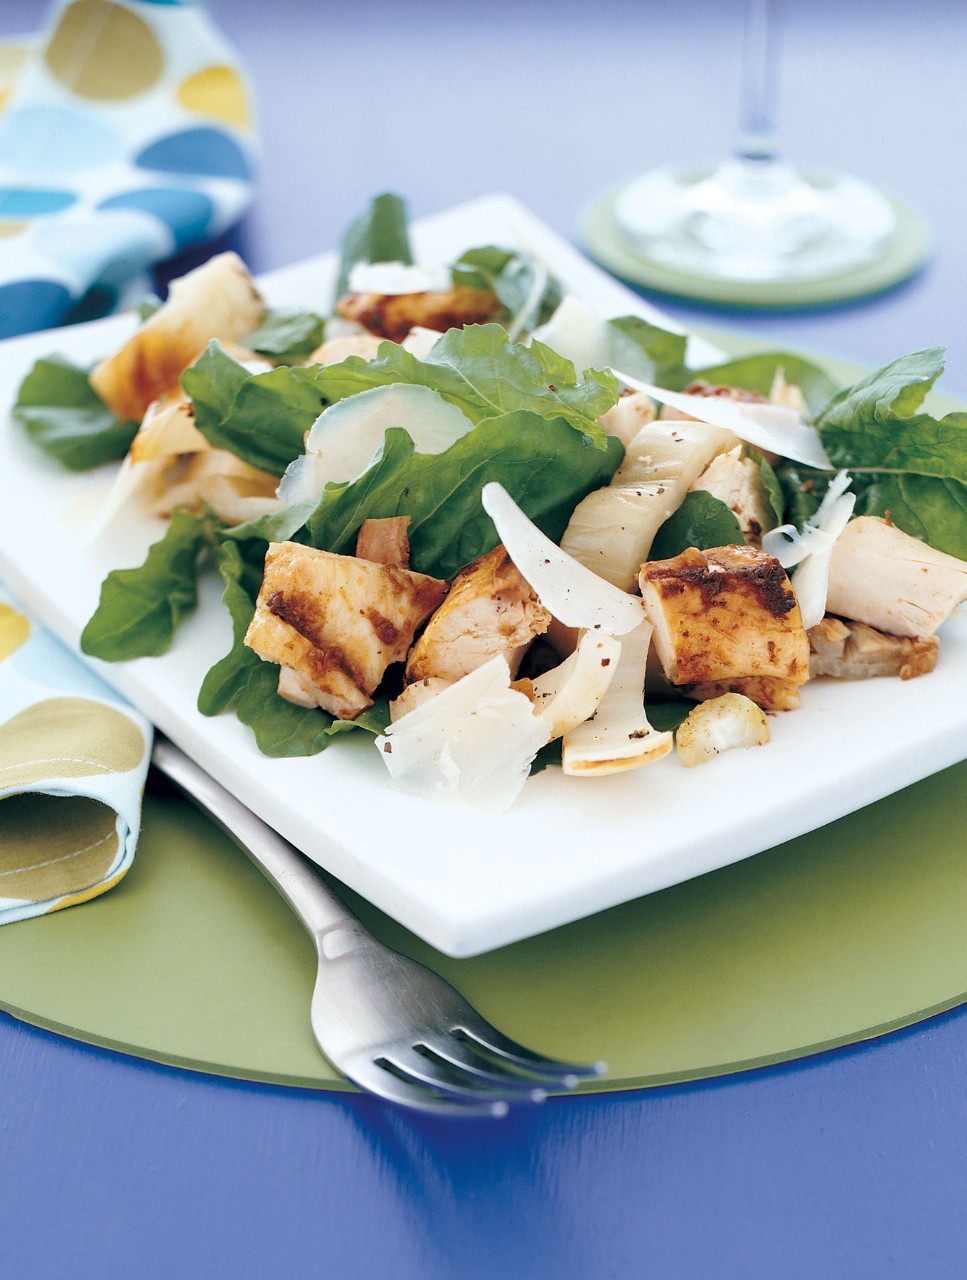 Arugula Salad with Grilled Chicken and Fennel